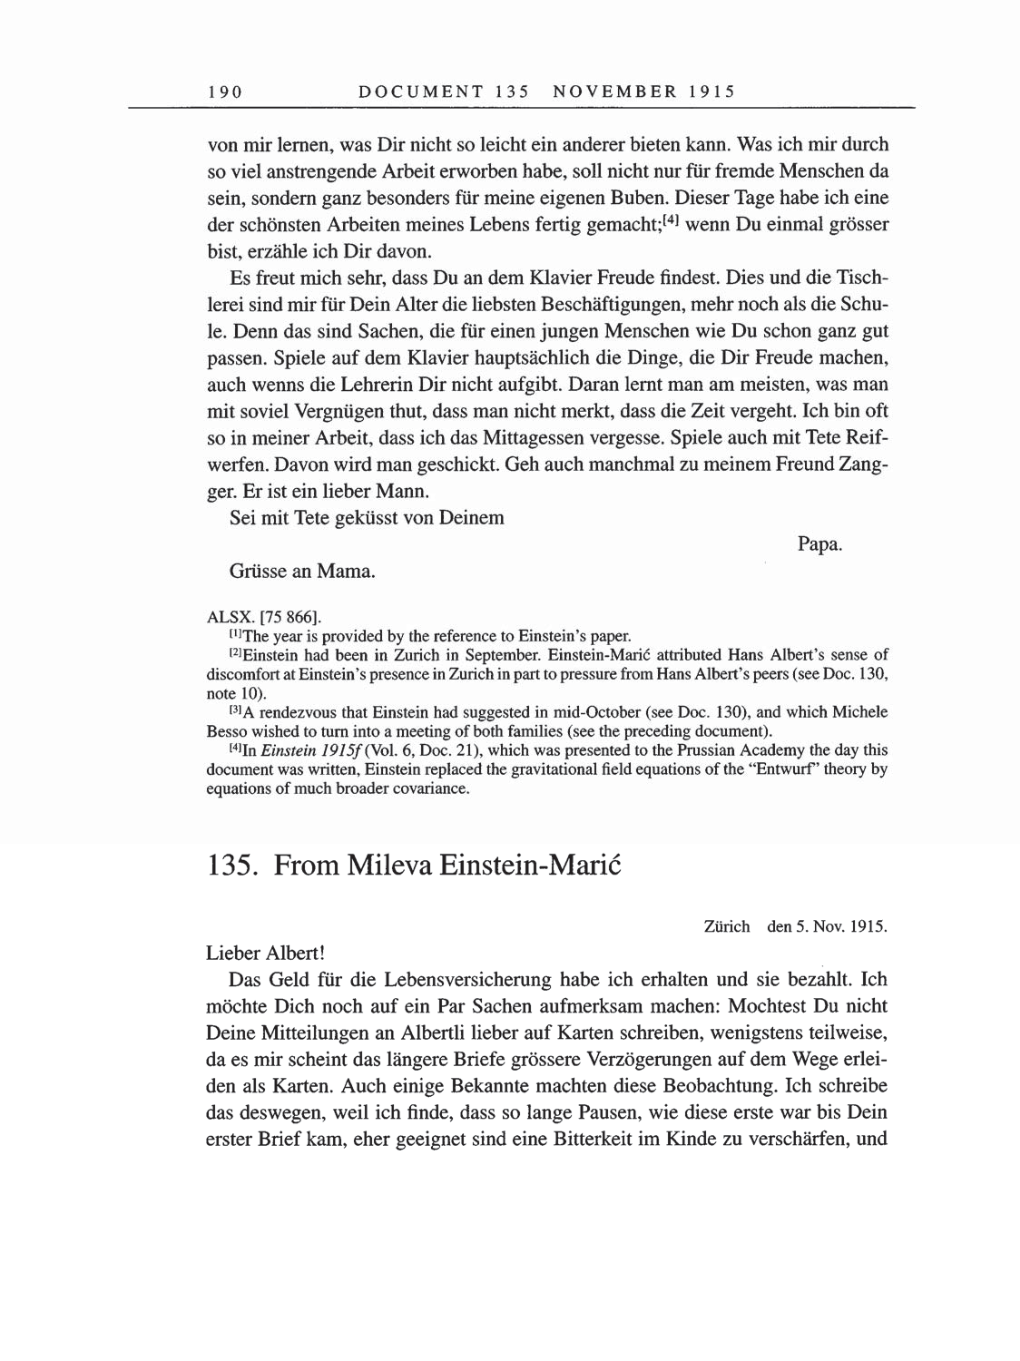 Volume 8, Part A: The Berlin Years: Correspondence 1914-1917 page 190